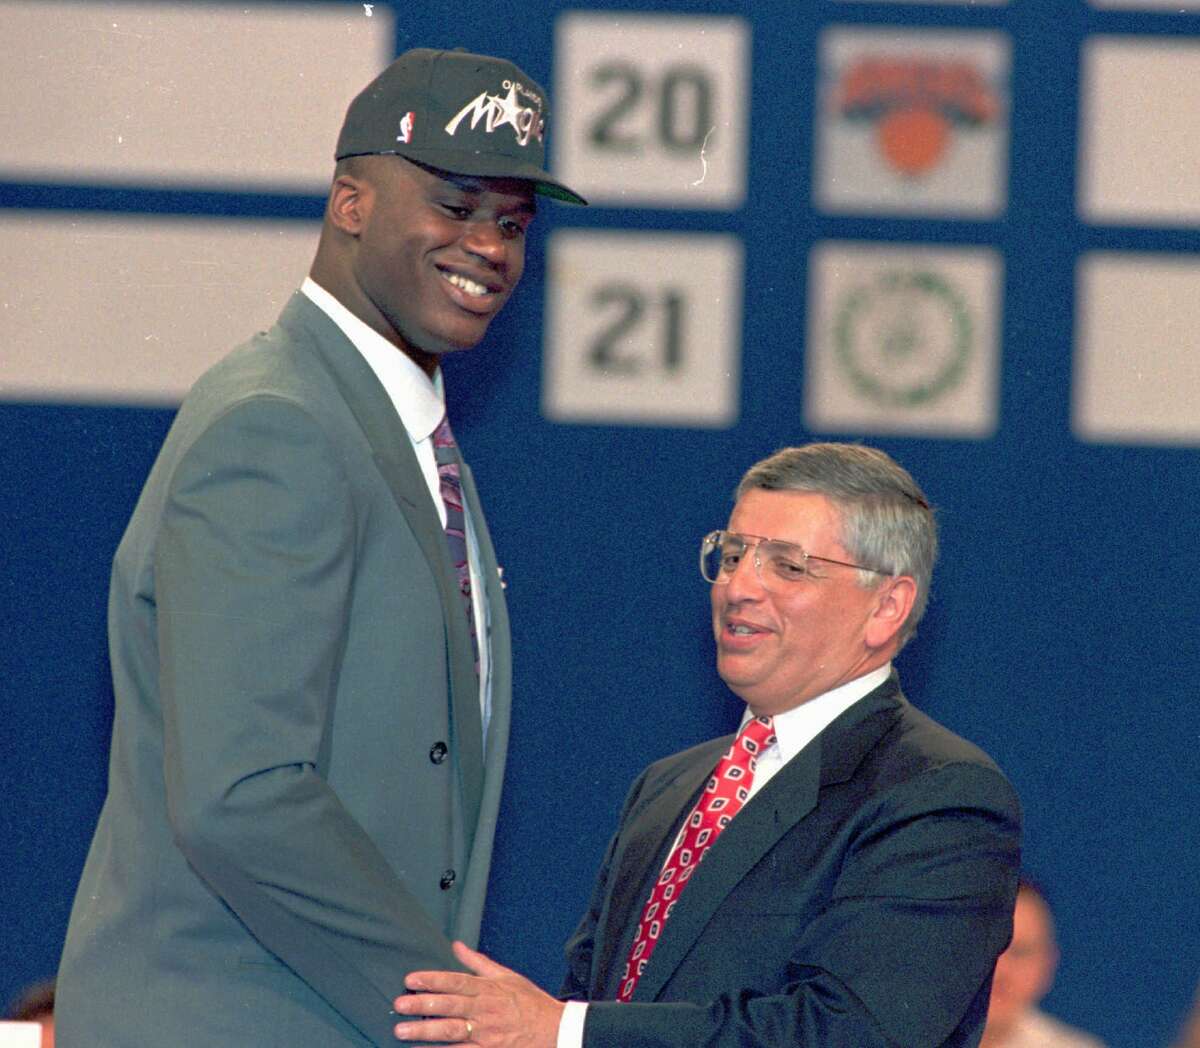 1992: Shaq, the No. 1 overall NBA Draft pick by the Orlando Magic, stormed into the league already a "commercial powerhouse," according to SB Nation, and delivered this pointed quote: "No matter who the opponent is, just go out and kill 'em."